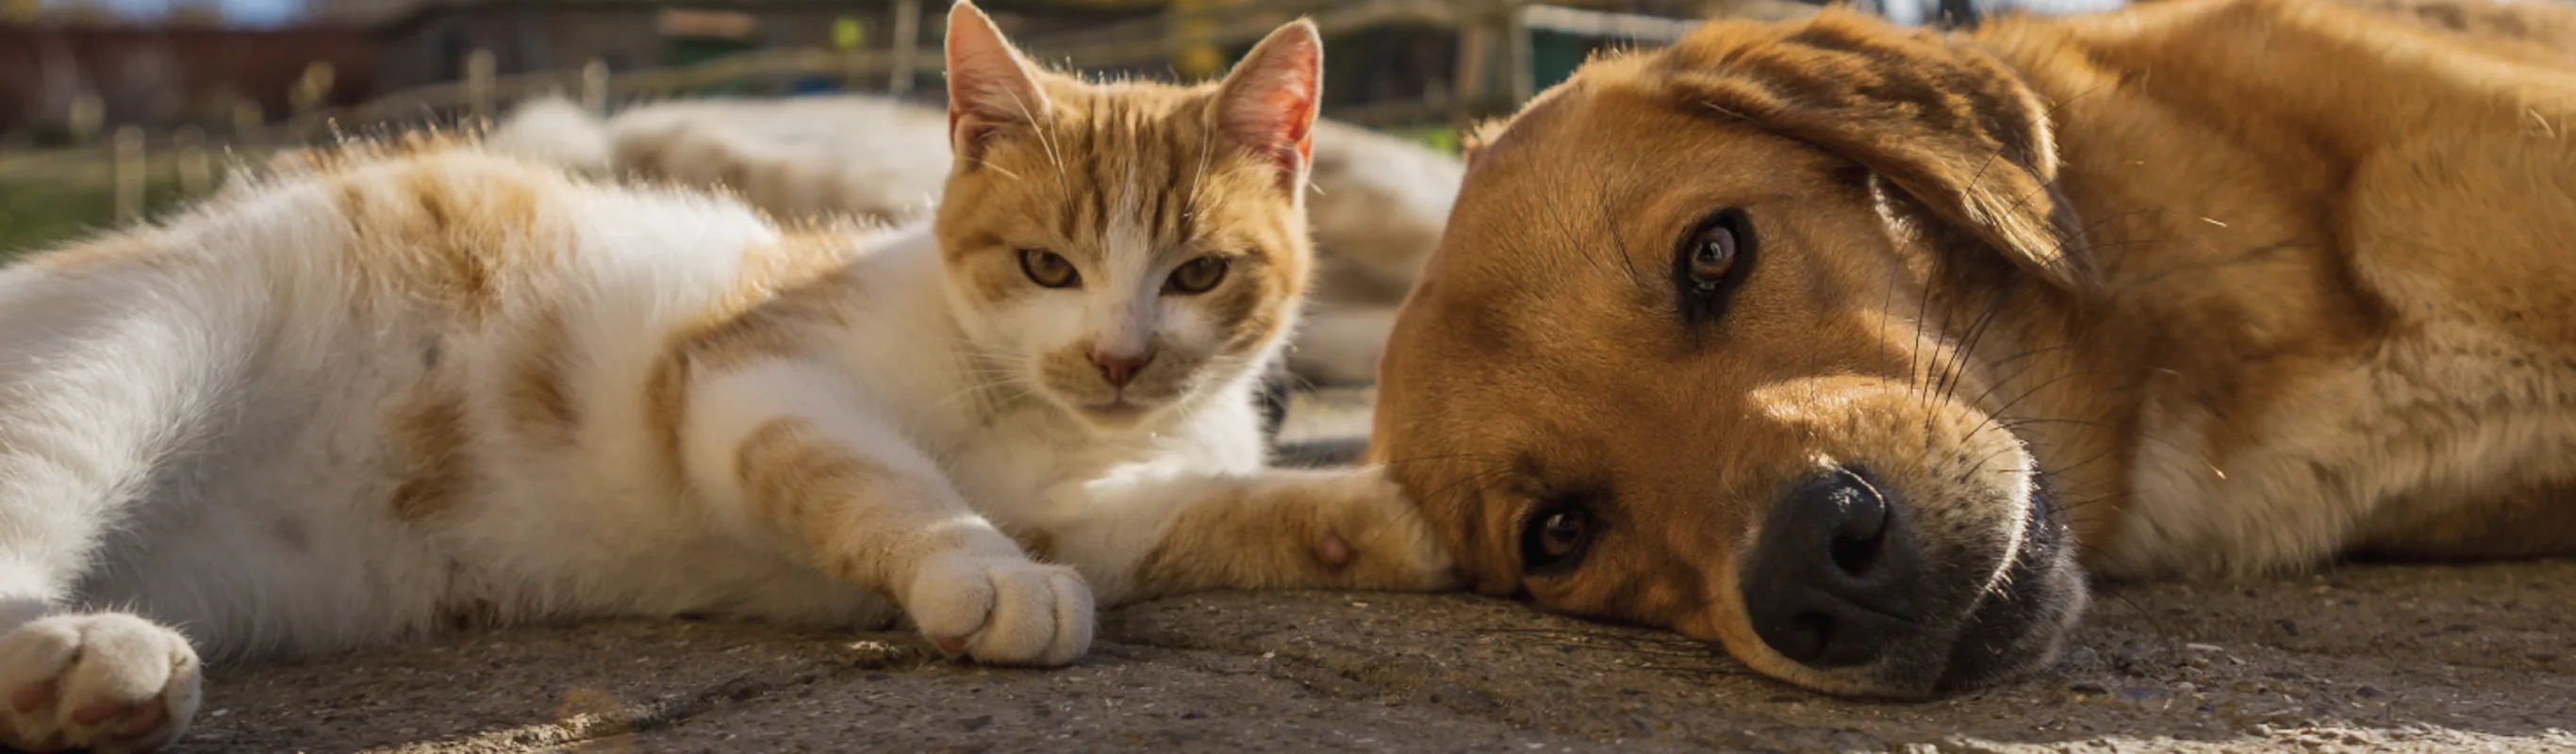 Dog and cat laying down